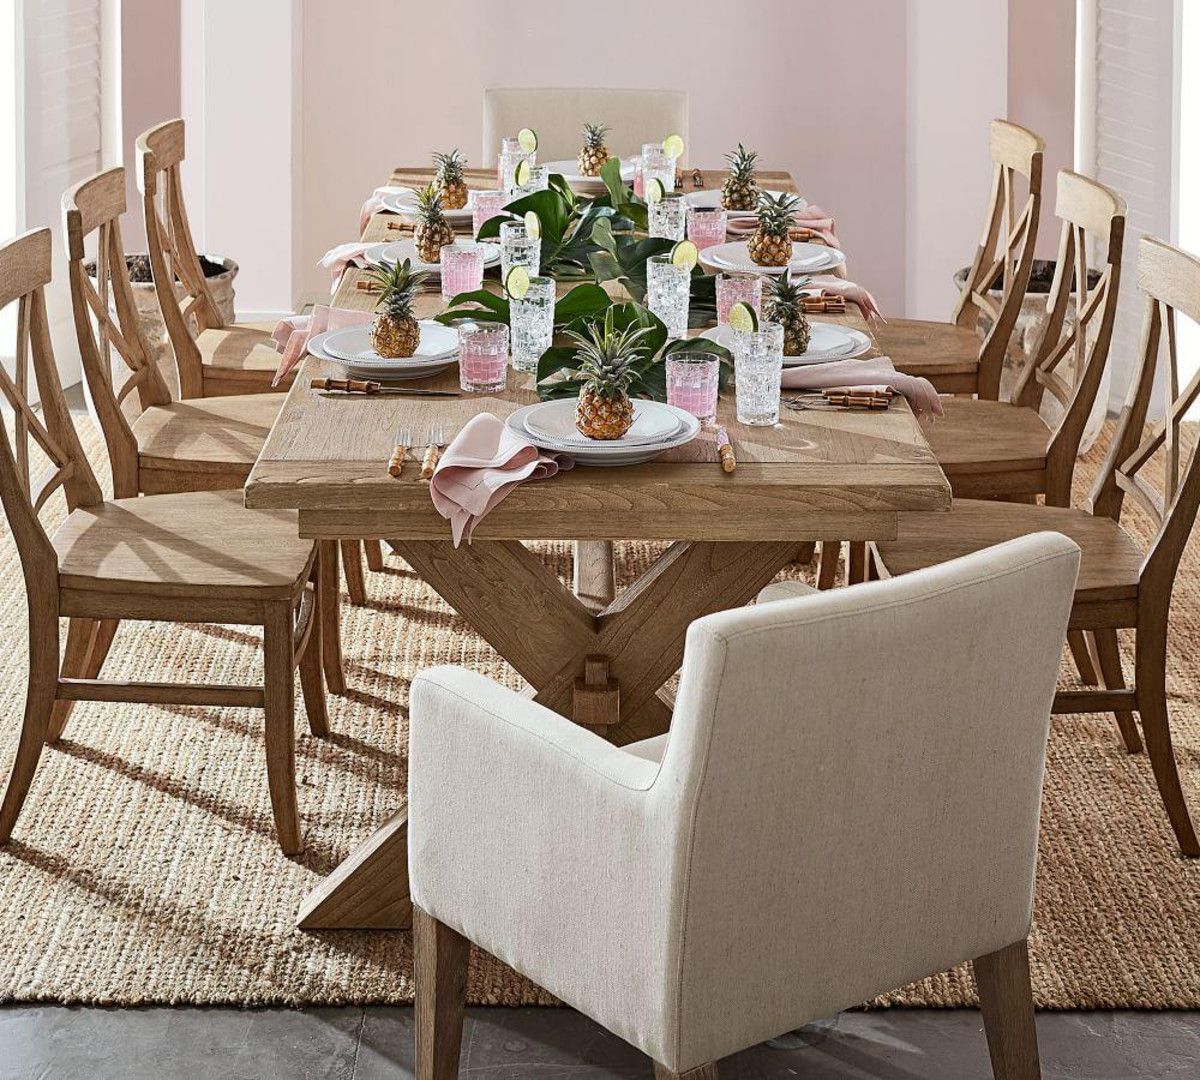 Toscana Extending Dining Table – Seadrift In 2019 Inside Current Belgian Gray Linden Extending Dining Tables (View 18 of 25)